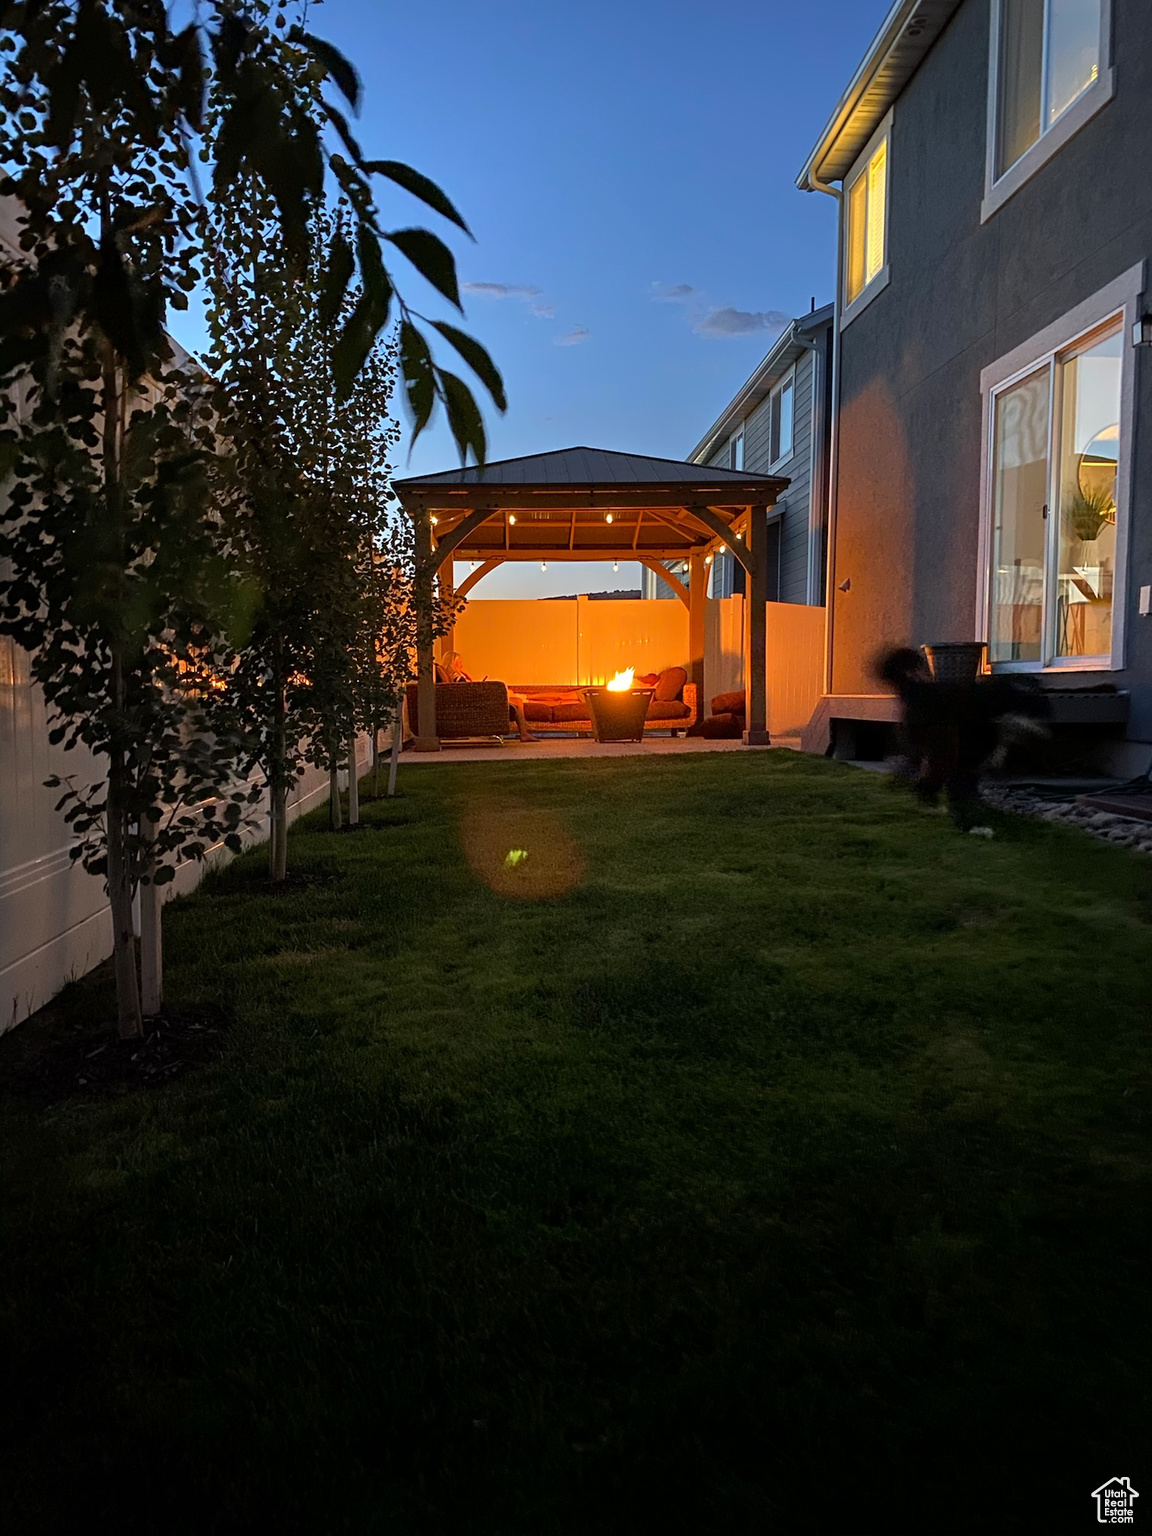 Yard at dusk with a patio and a gazebo